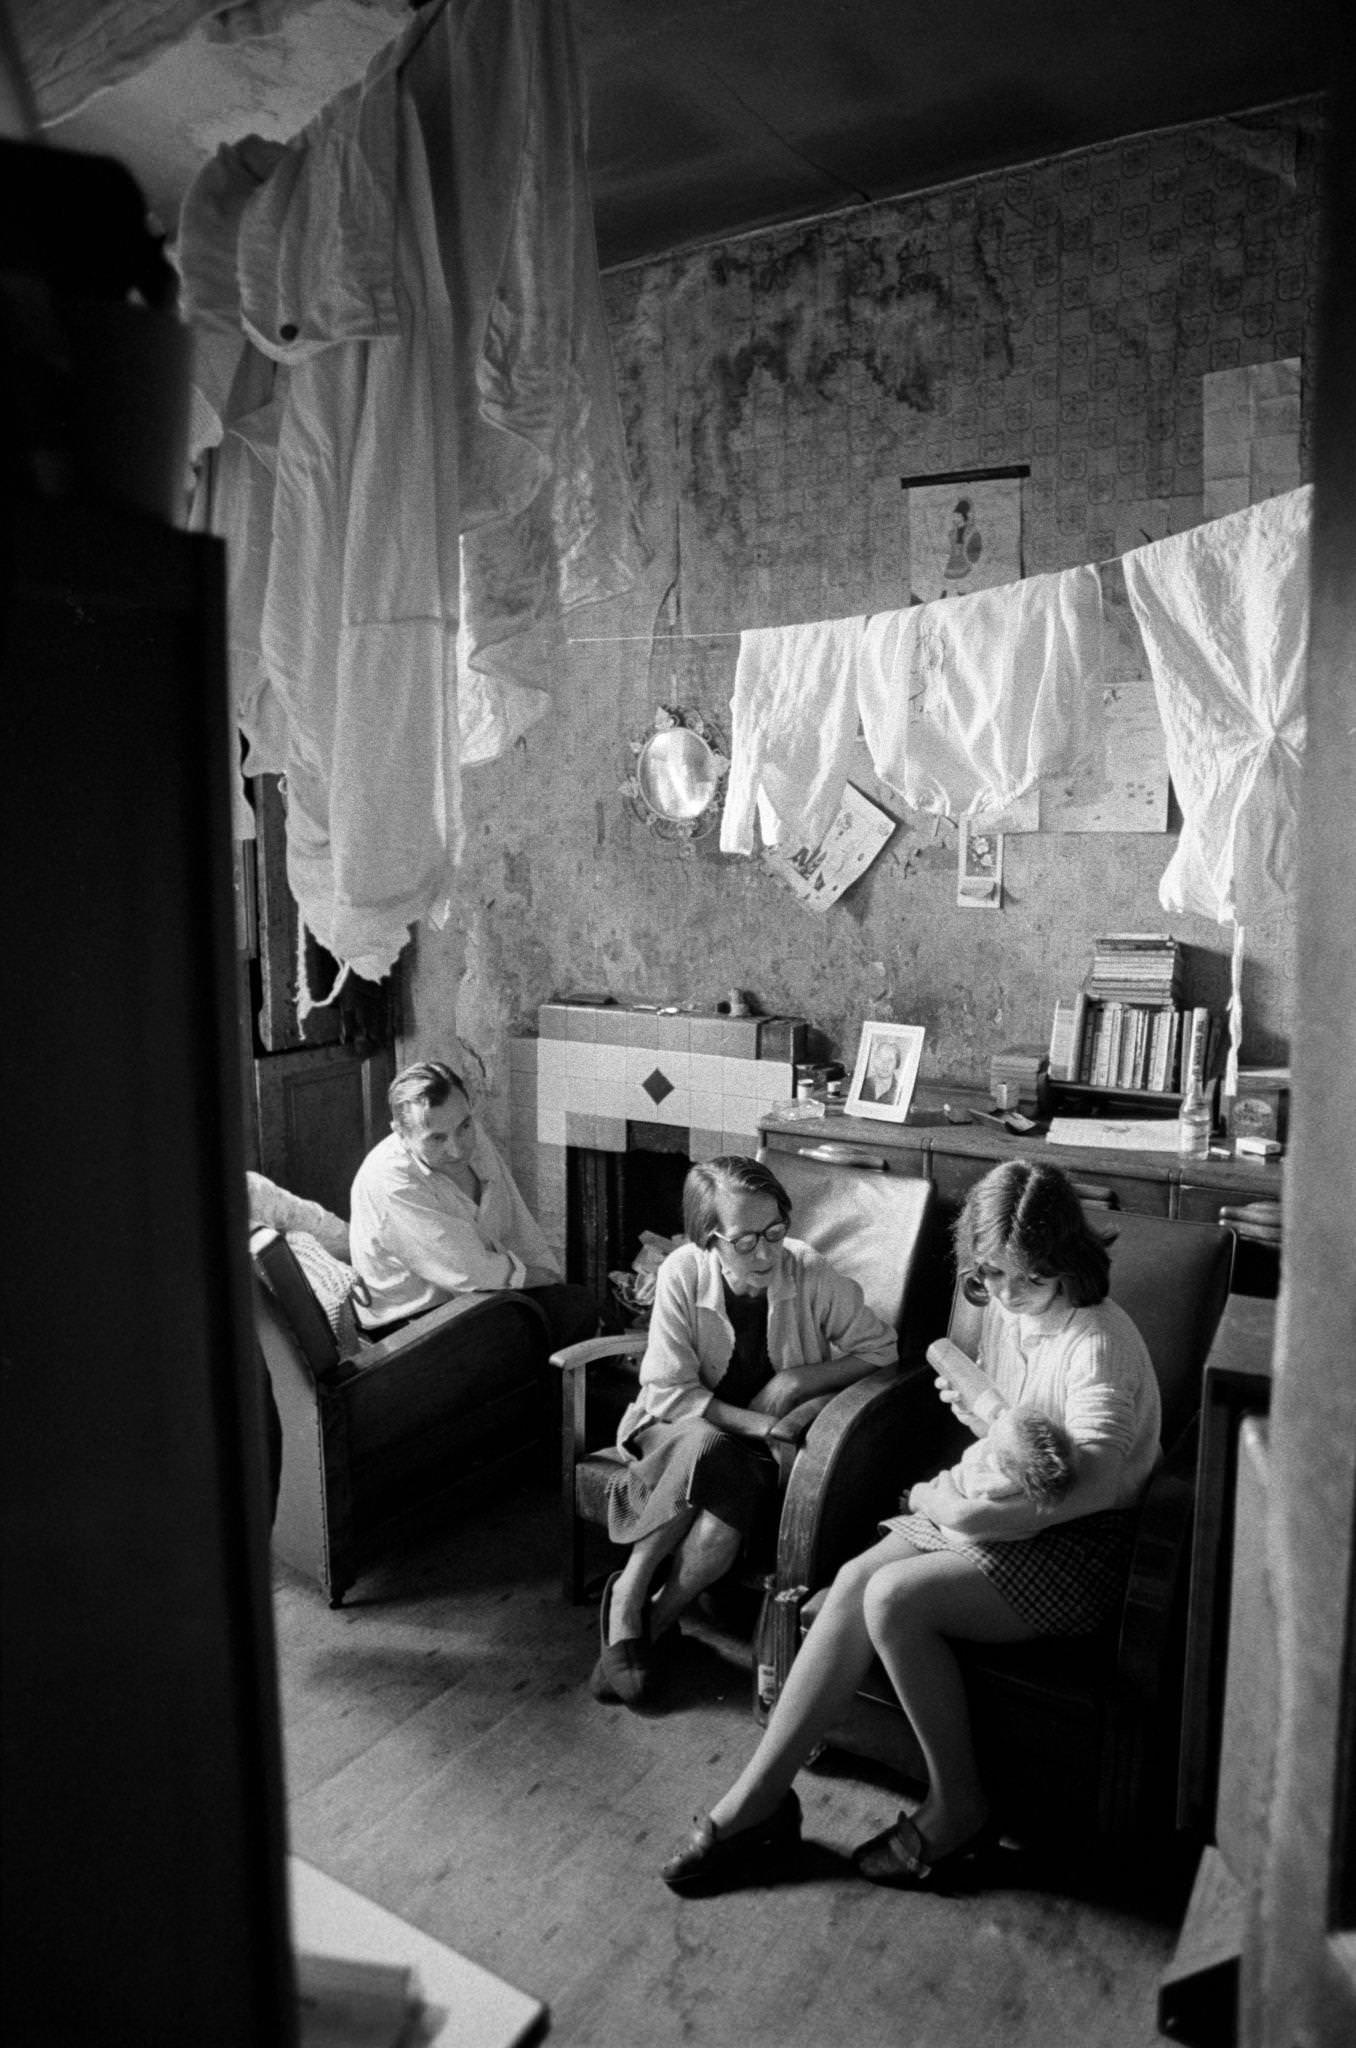 Four people, including an older couple and a young girl feeding her baby, in their home in the notorious Gorbals district of Glasgow, 1969.